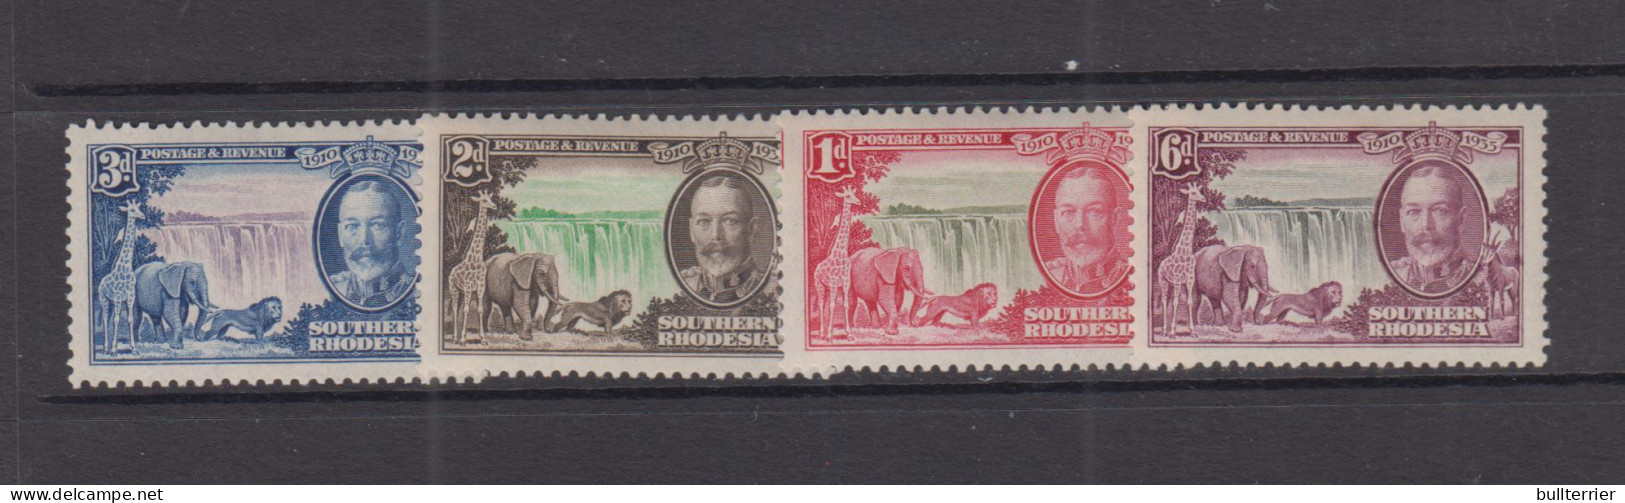 SOUTHERN RHODESIA - 1935 - JUBILEE SET OF 4 MINT HINGED PREVIOUSLY , SG CAT £31 - Southern Rhodesia (...-1964)